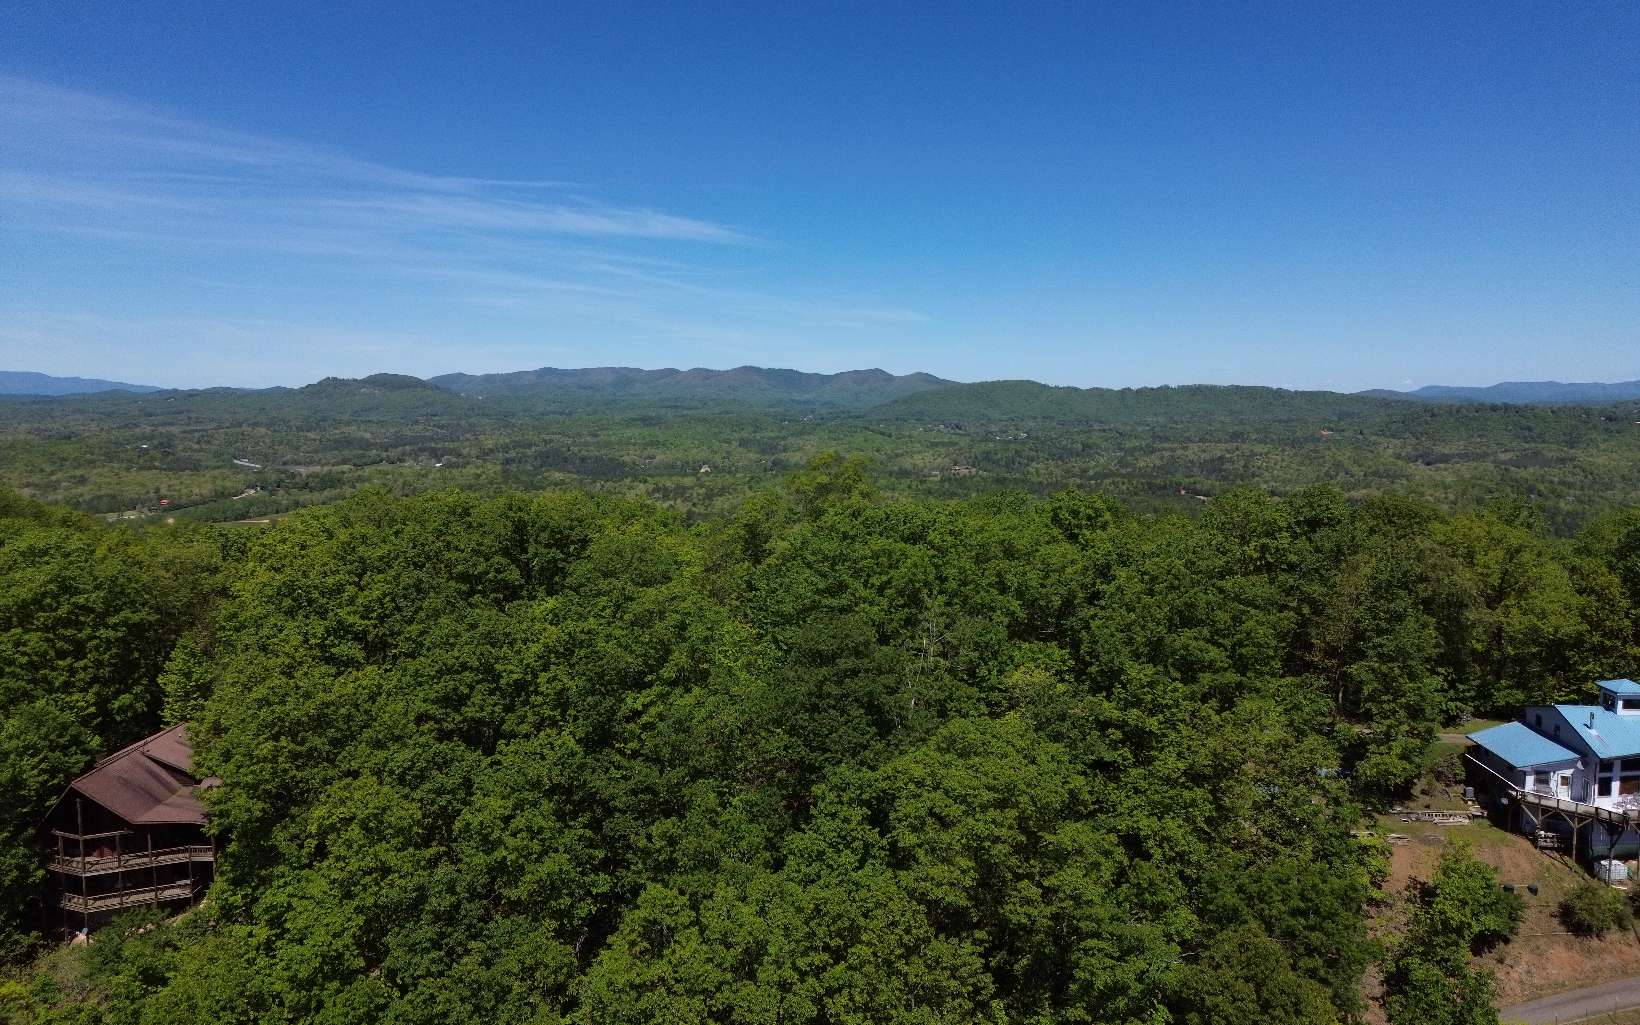 WOW! Hurry before it's too late, this rare ridge-top property is one of the last raw lots on top of Bruce Mountain. This is the true definition of Long Range Mountain views! Come build your dream home and take in the fresh air and breathtaking scene. This property, with a little tree trimming, will offer 180 degrees of undisturbed views.